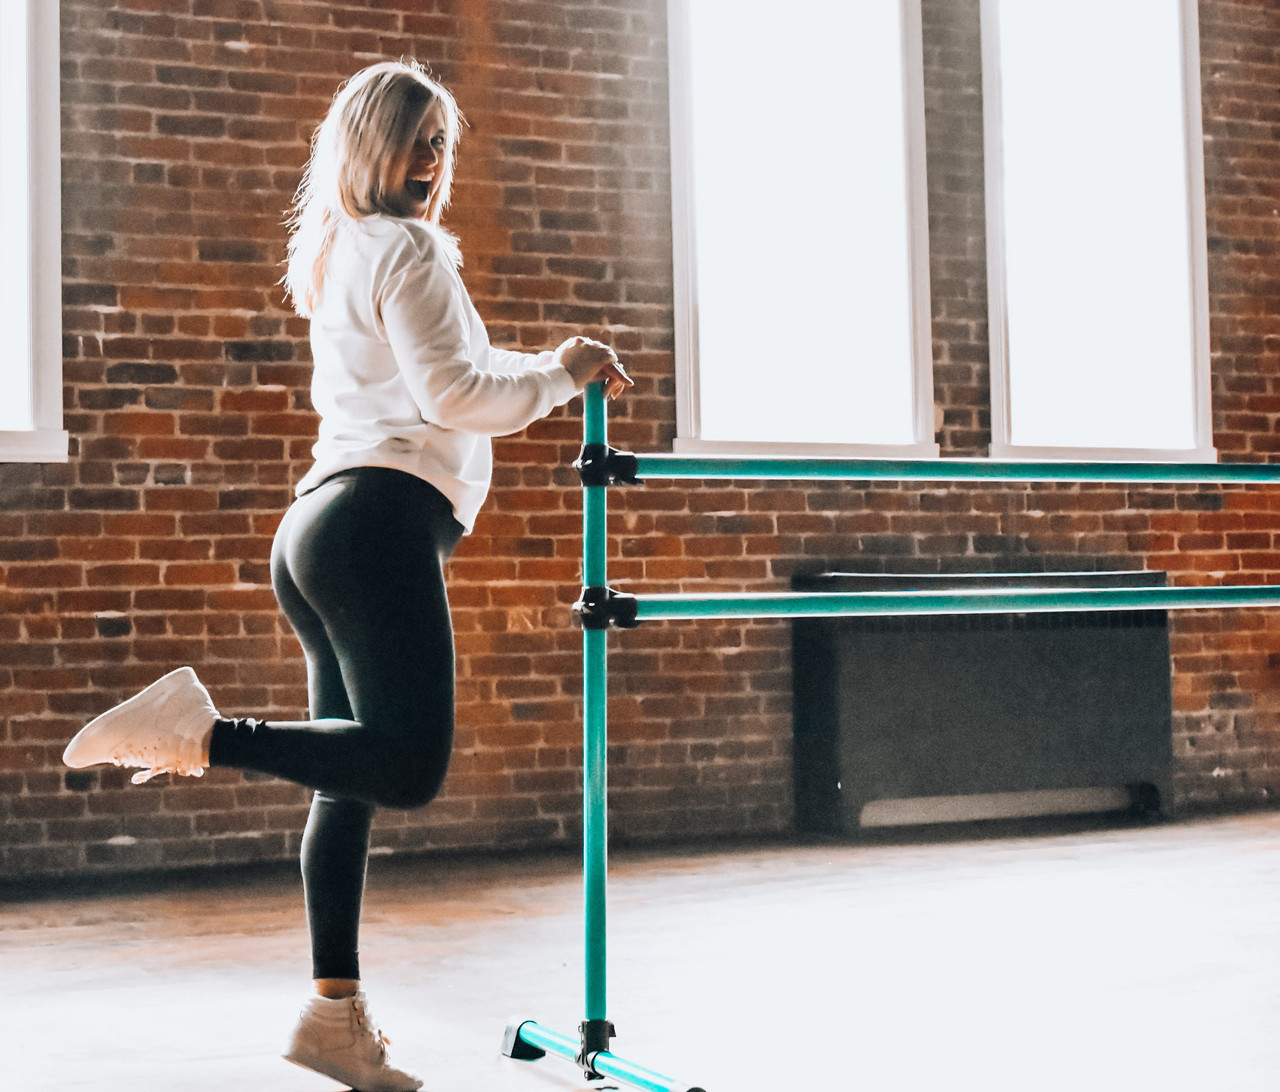 VITA Barre Portable Freestanding Double Ballet Barre, Fit, Dark Mystic  Gray, Aluminum | Adjustable Height, Made in USA, Home or Gym Exercise  Equipment